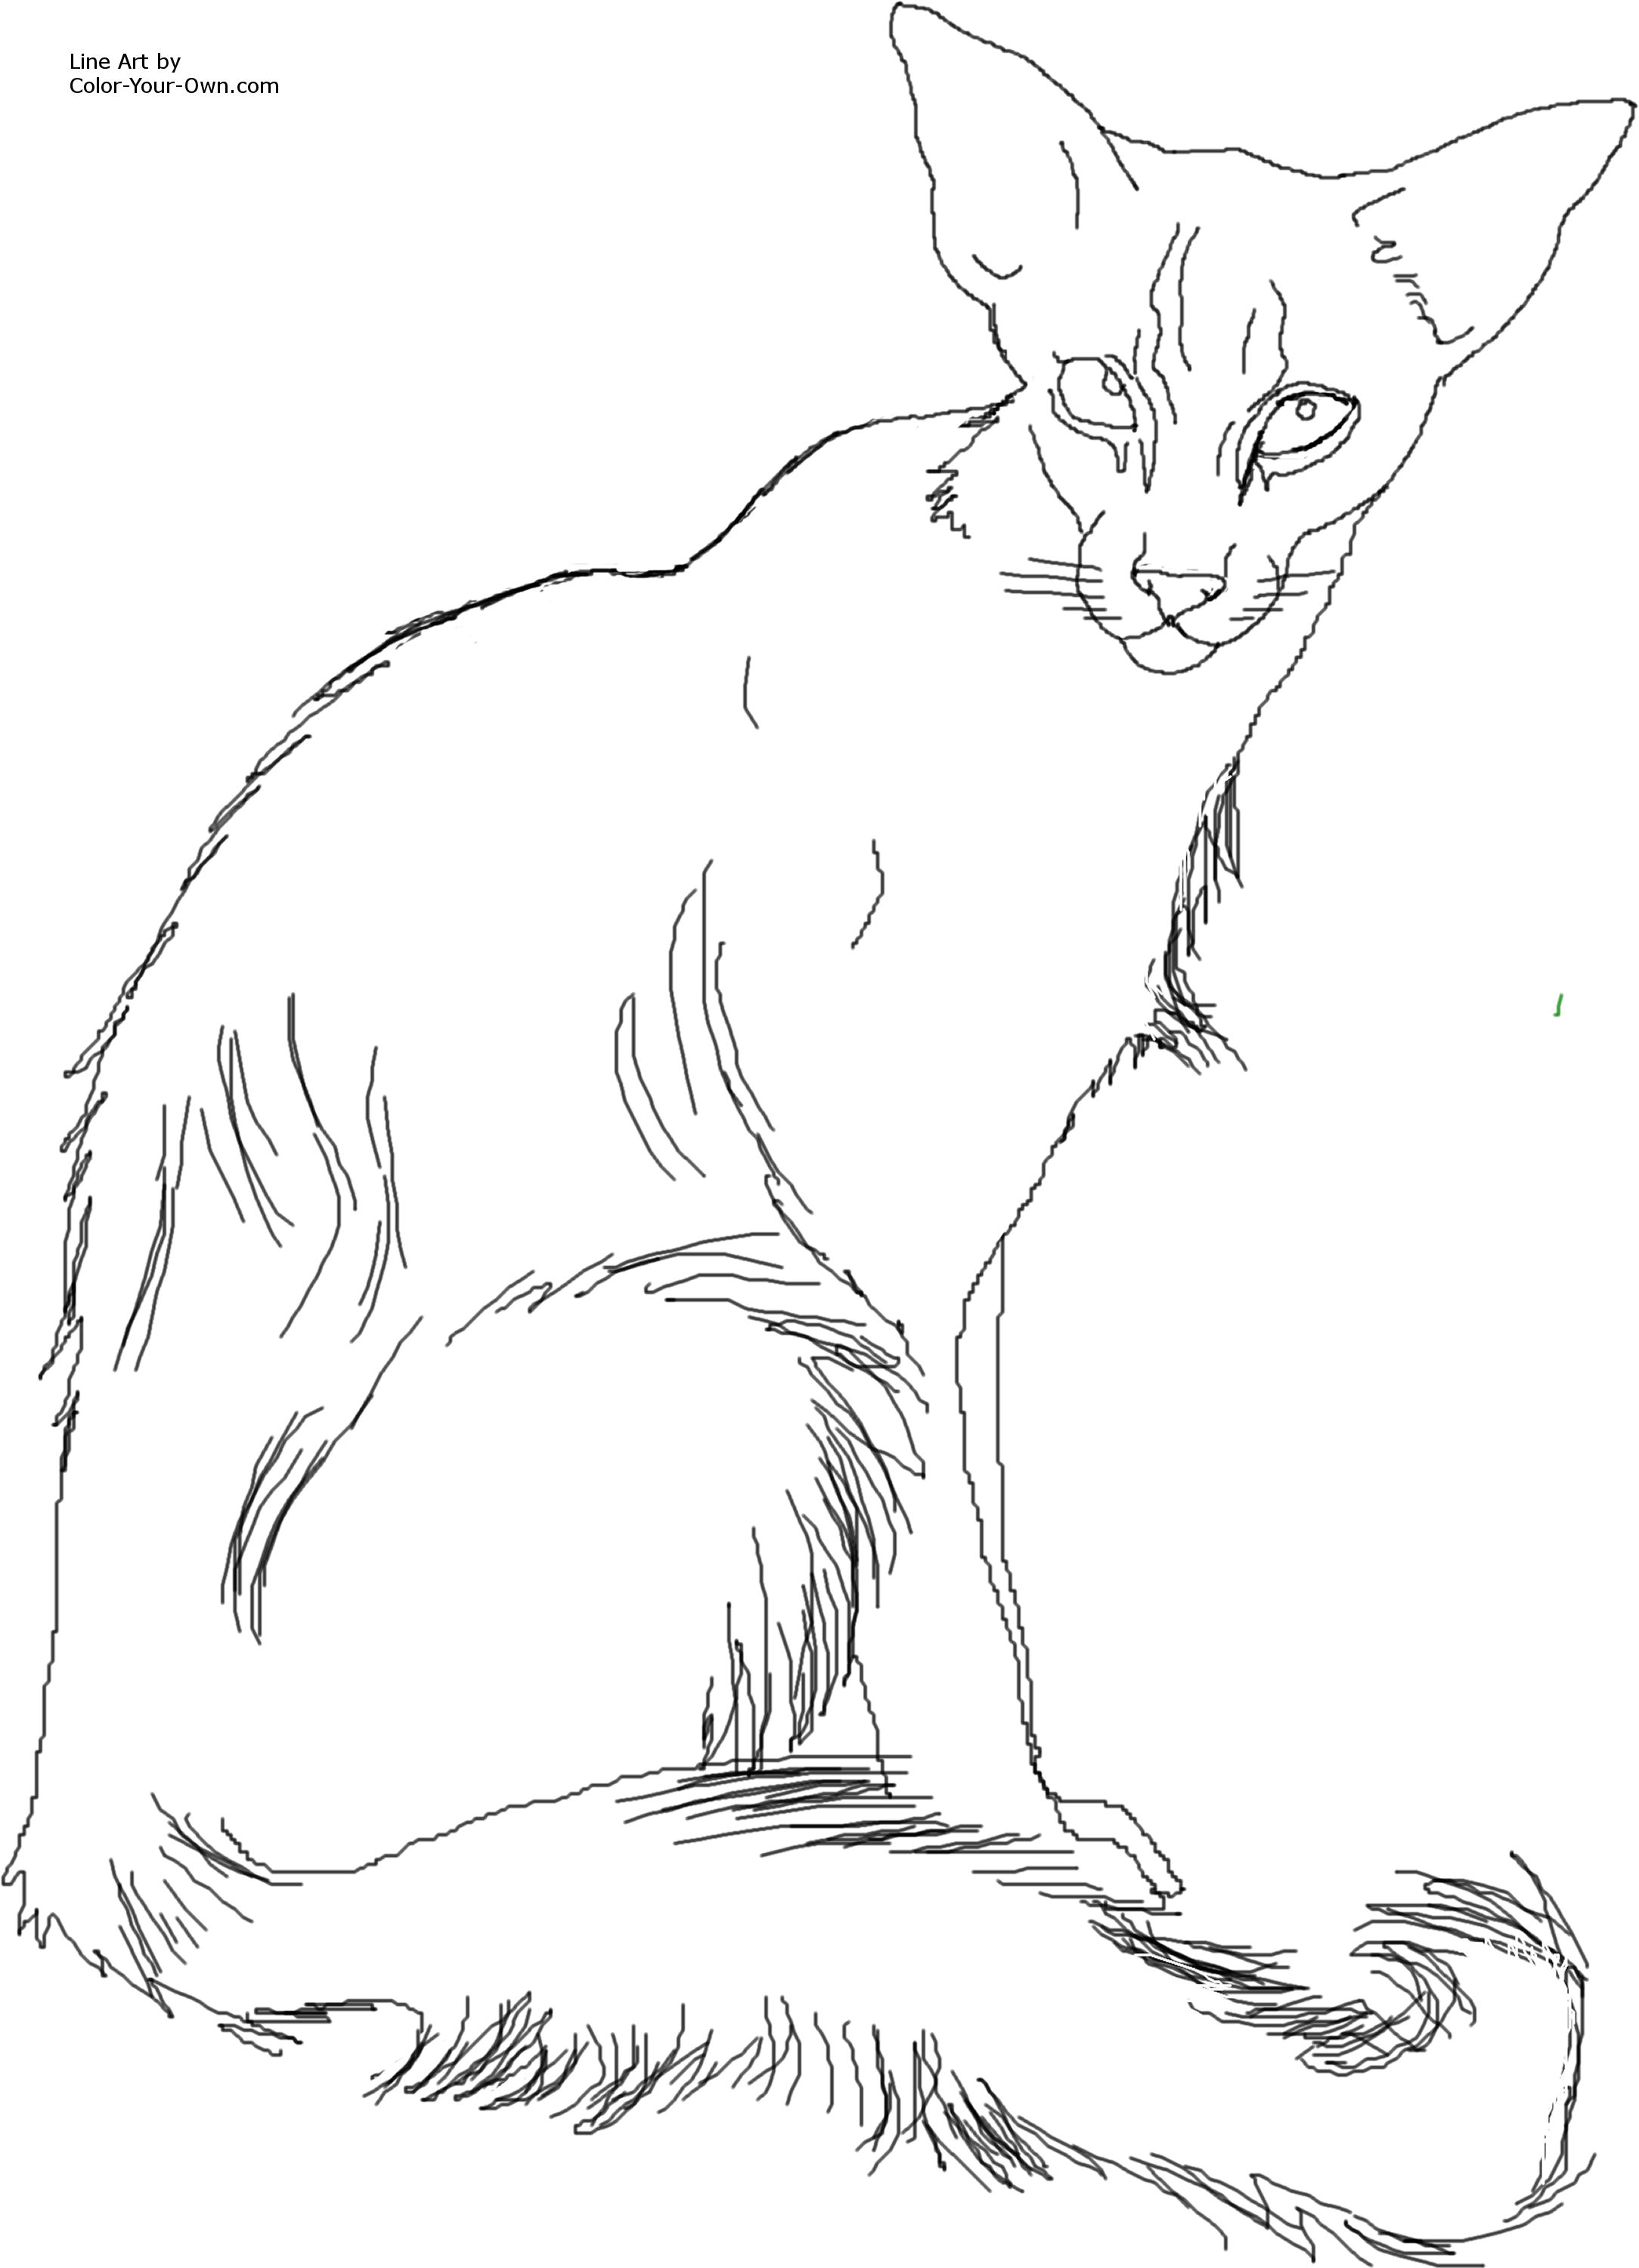 Siamese Cat Coloring Page at GetColorings.com | Free printable